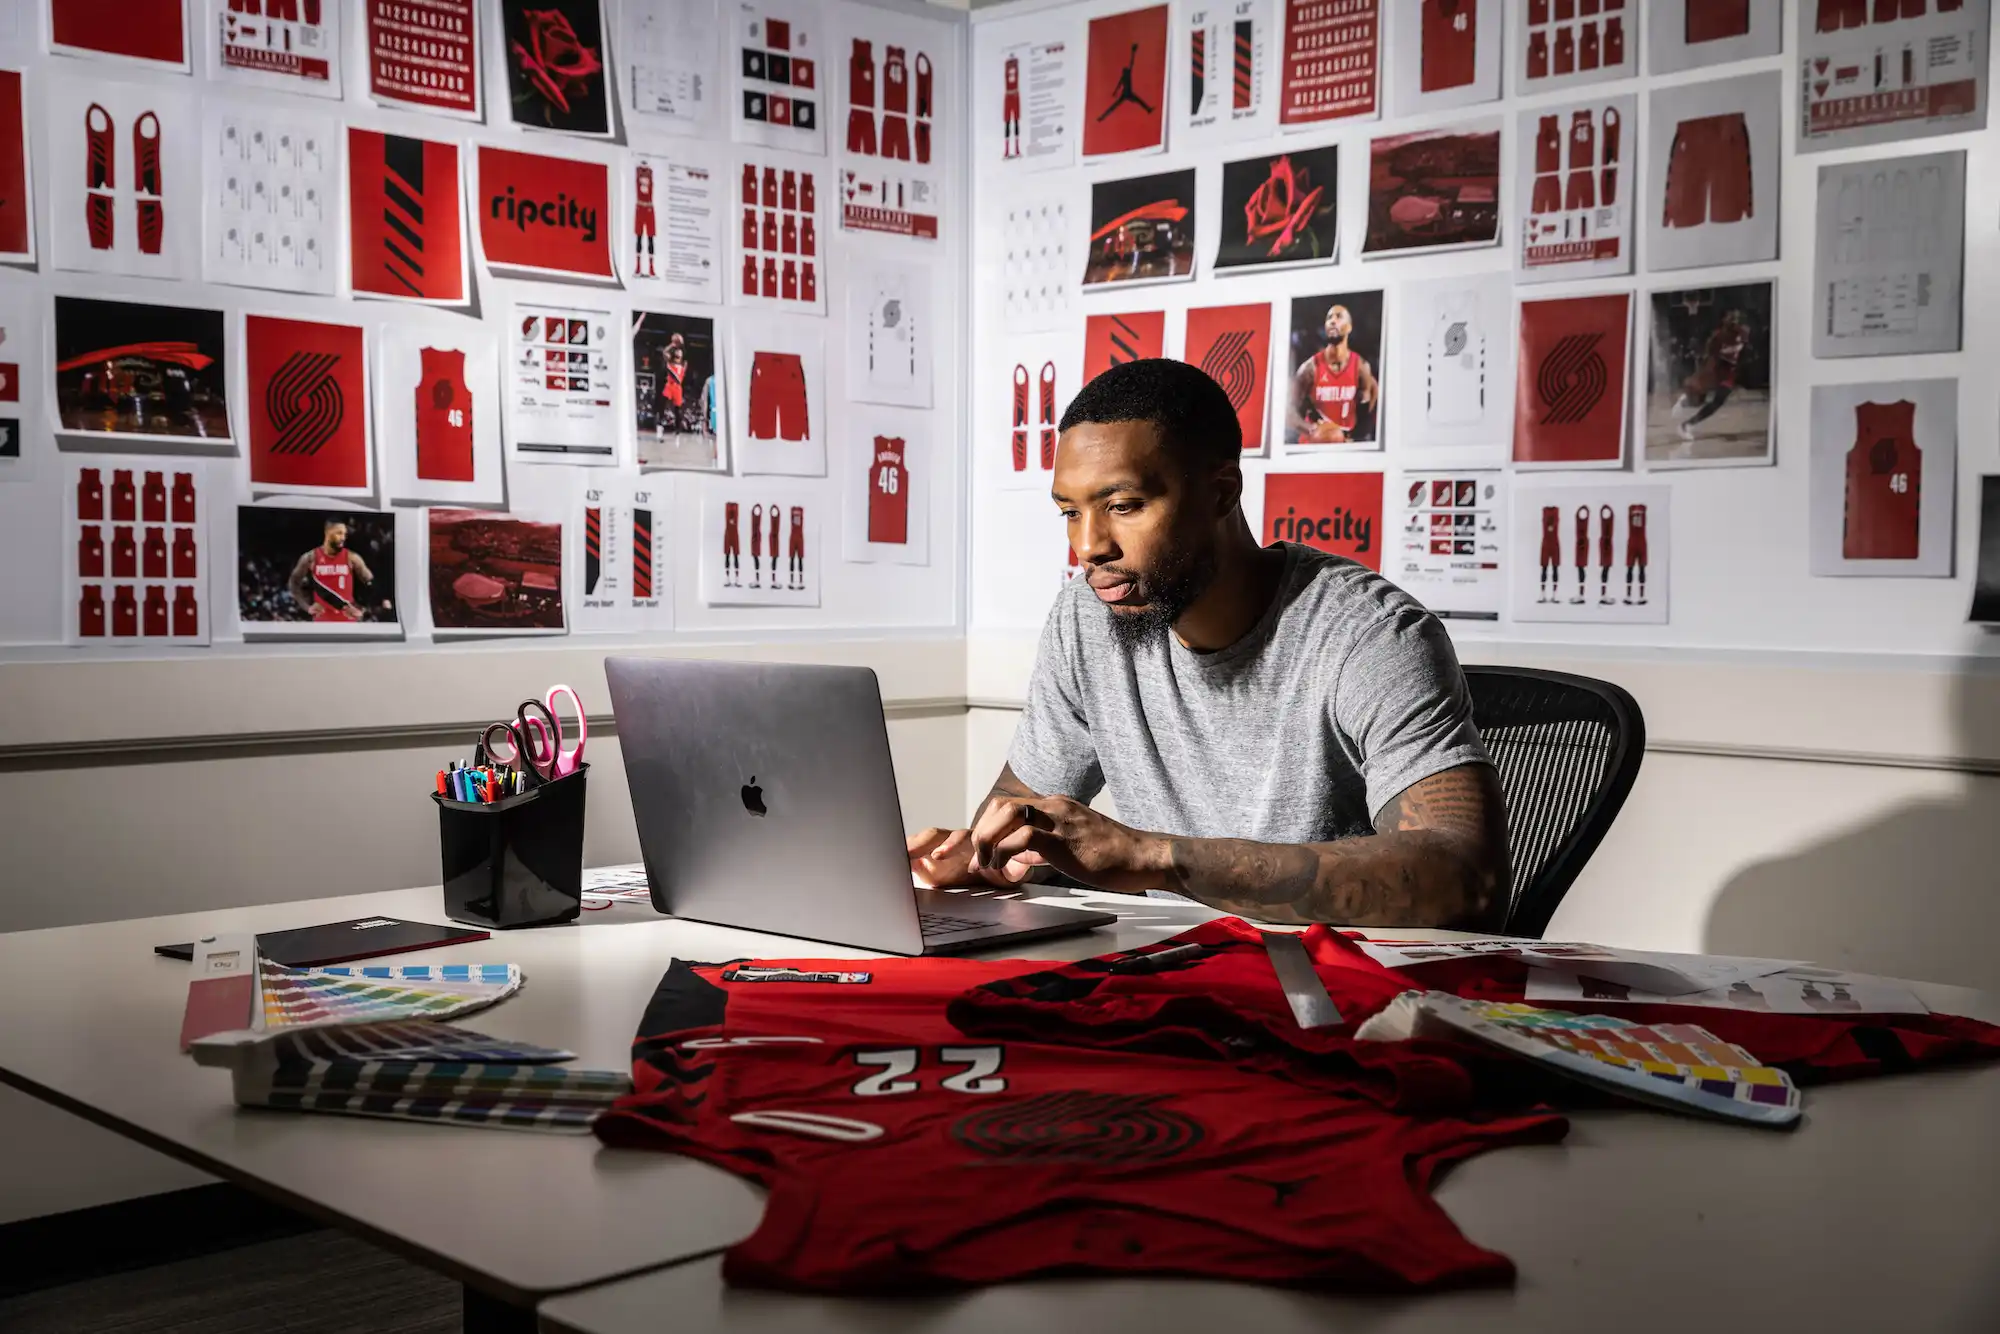 Trail Blazers Release New City Edition Uniform with Blend of Basketball  and Portland's Local Art Community